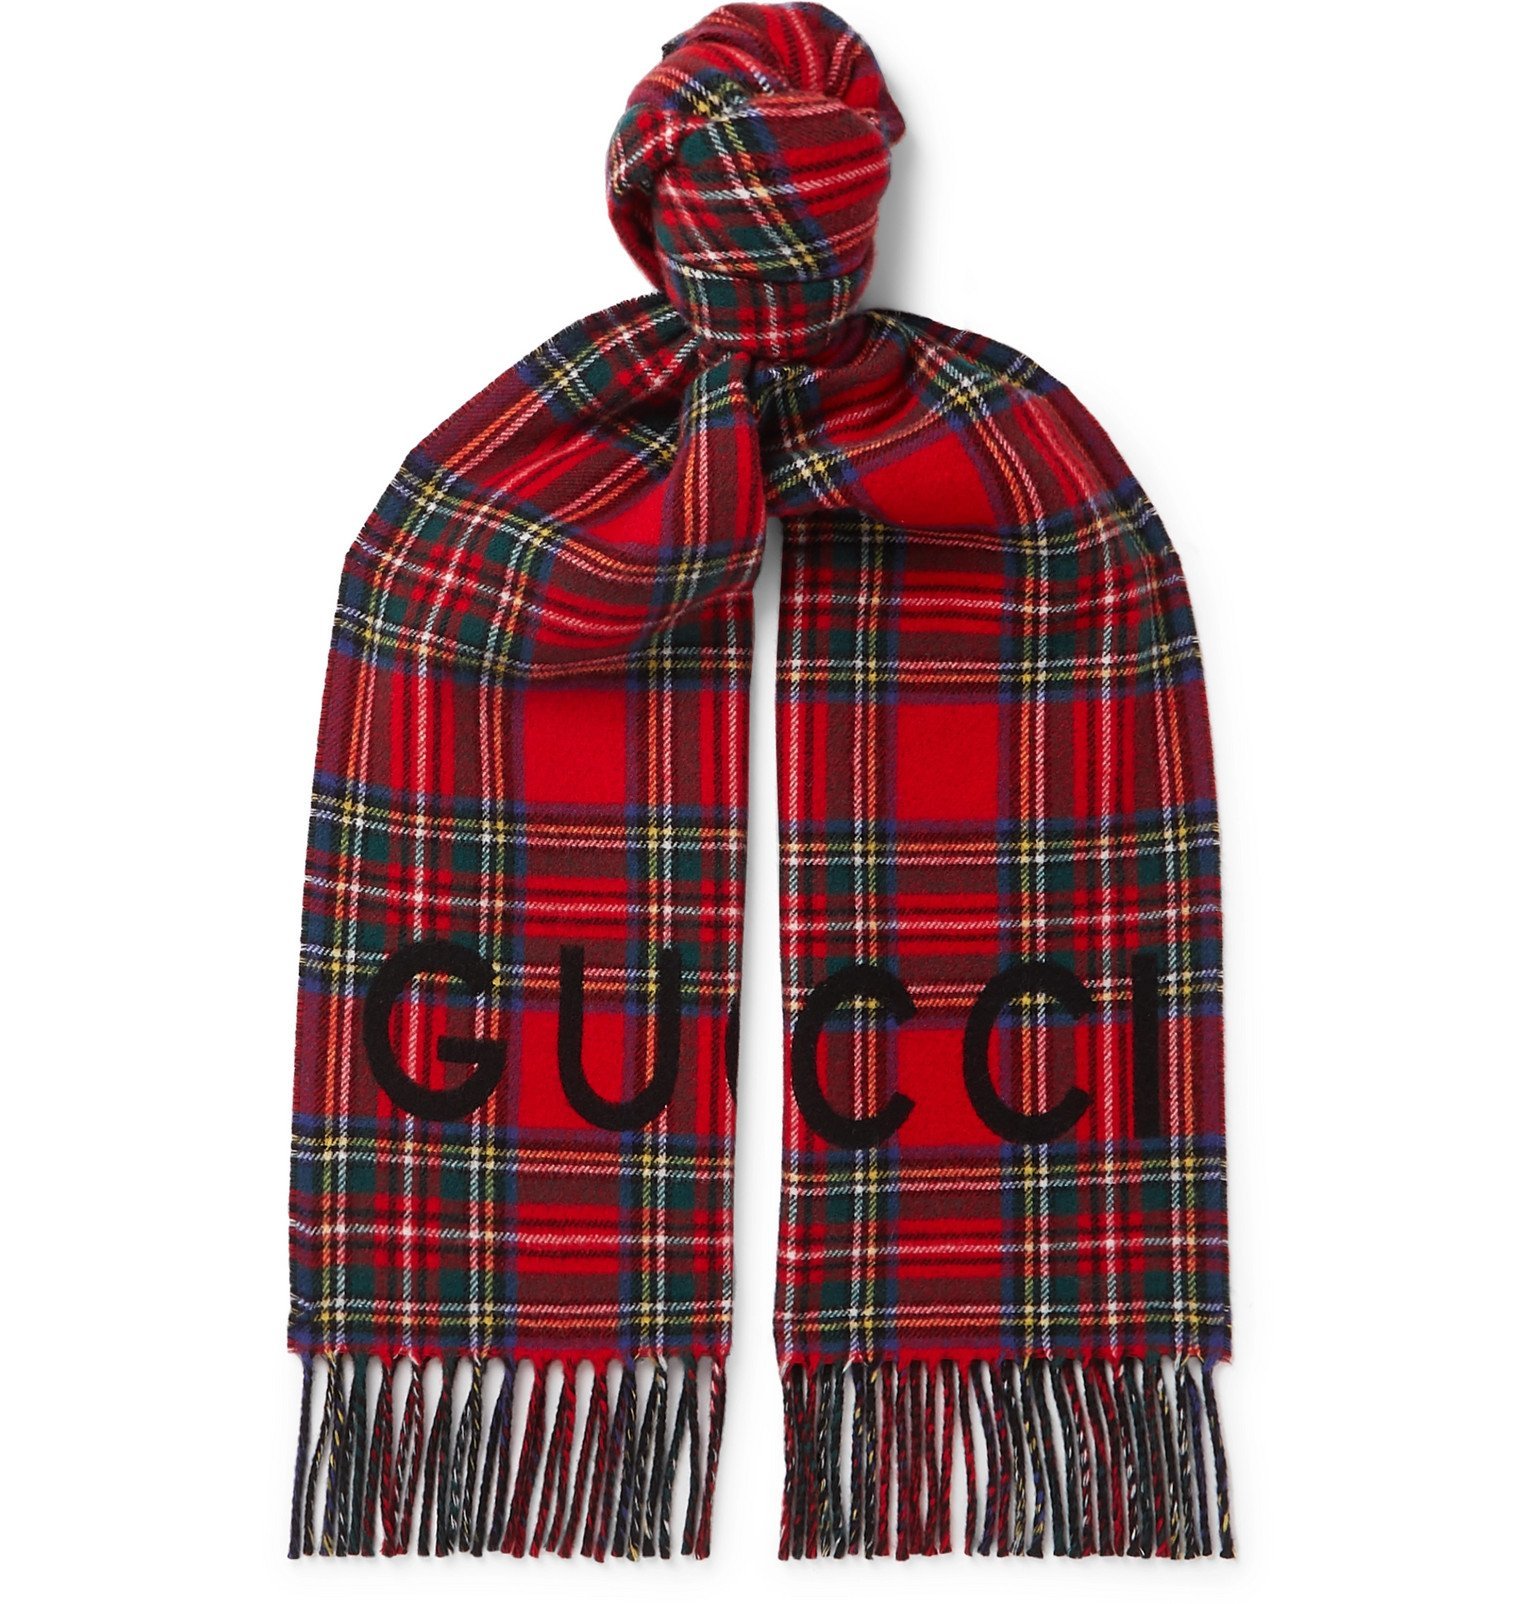 Gucci - Logo-Print Checked Wool and Cashmere-Blend Scarf - Red Gucci